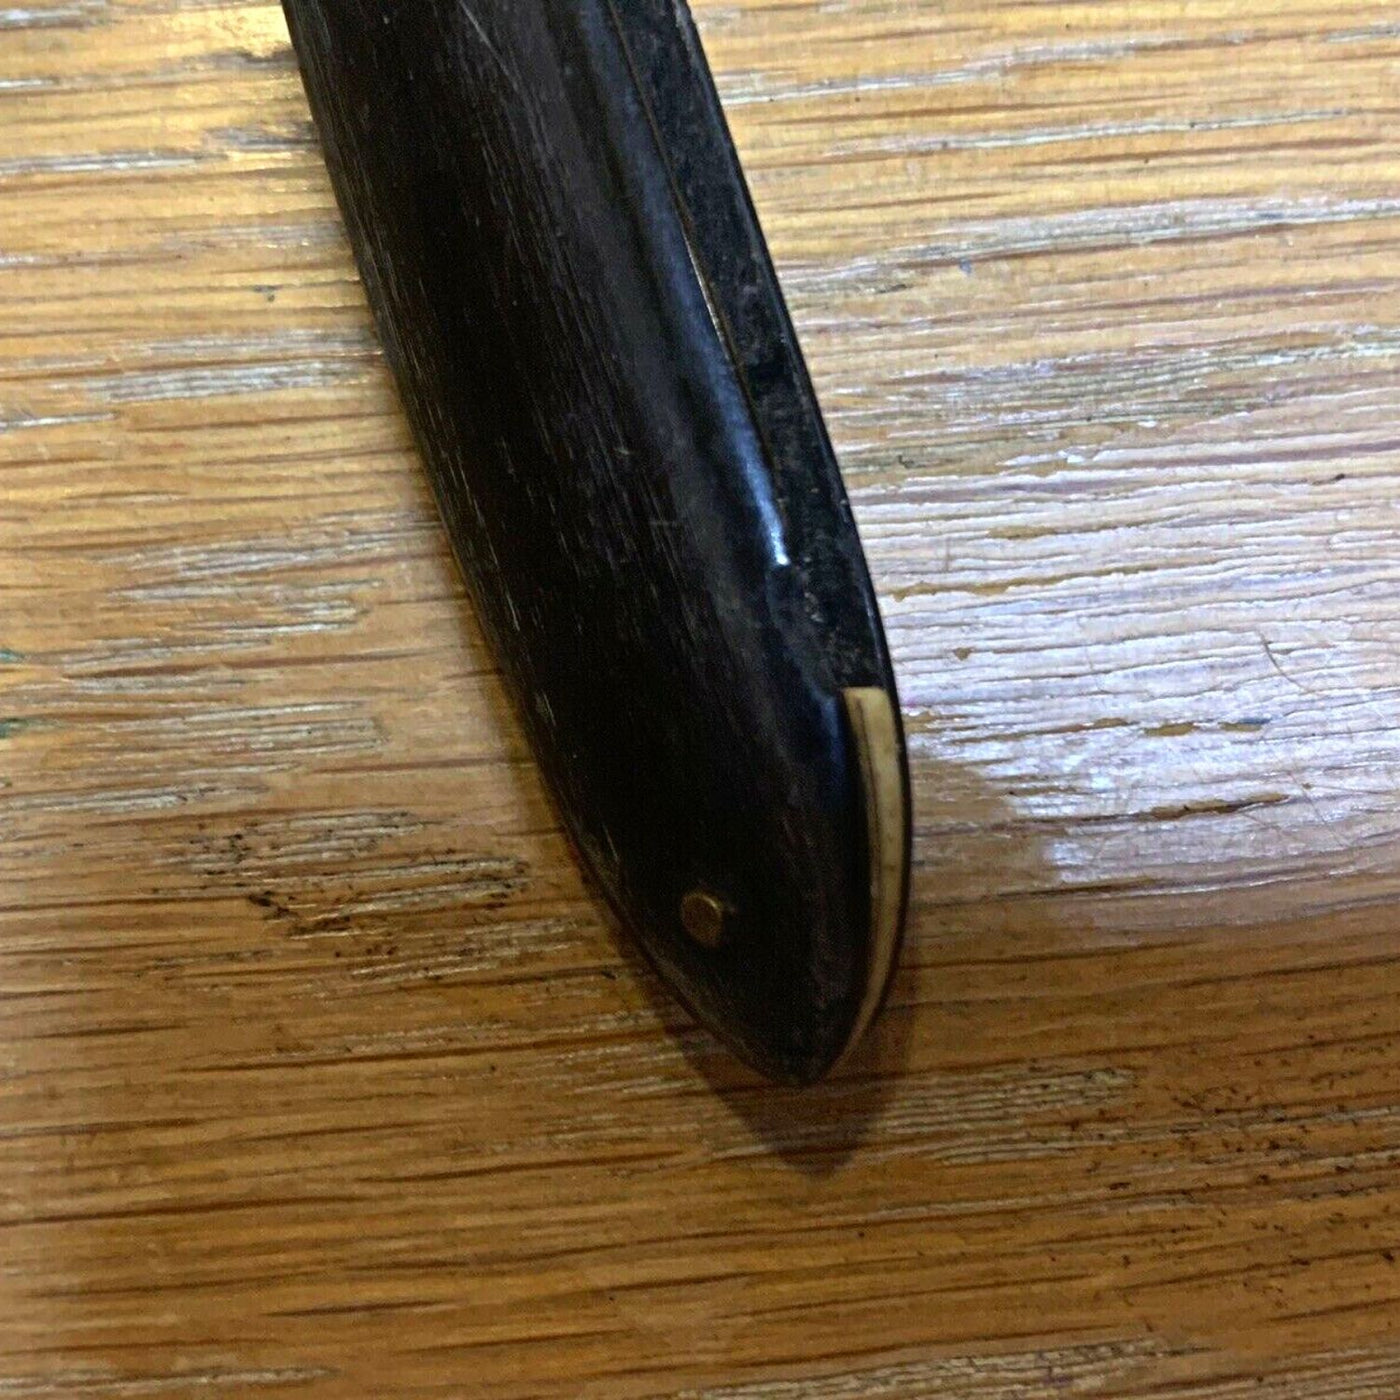  Vintage John Clarke and Sons Hollow Ground Straight Razor by Naked Armor sold by Naked Armor Razors